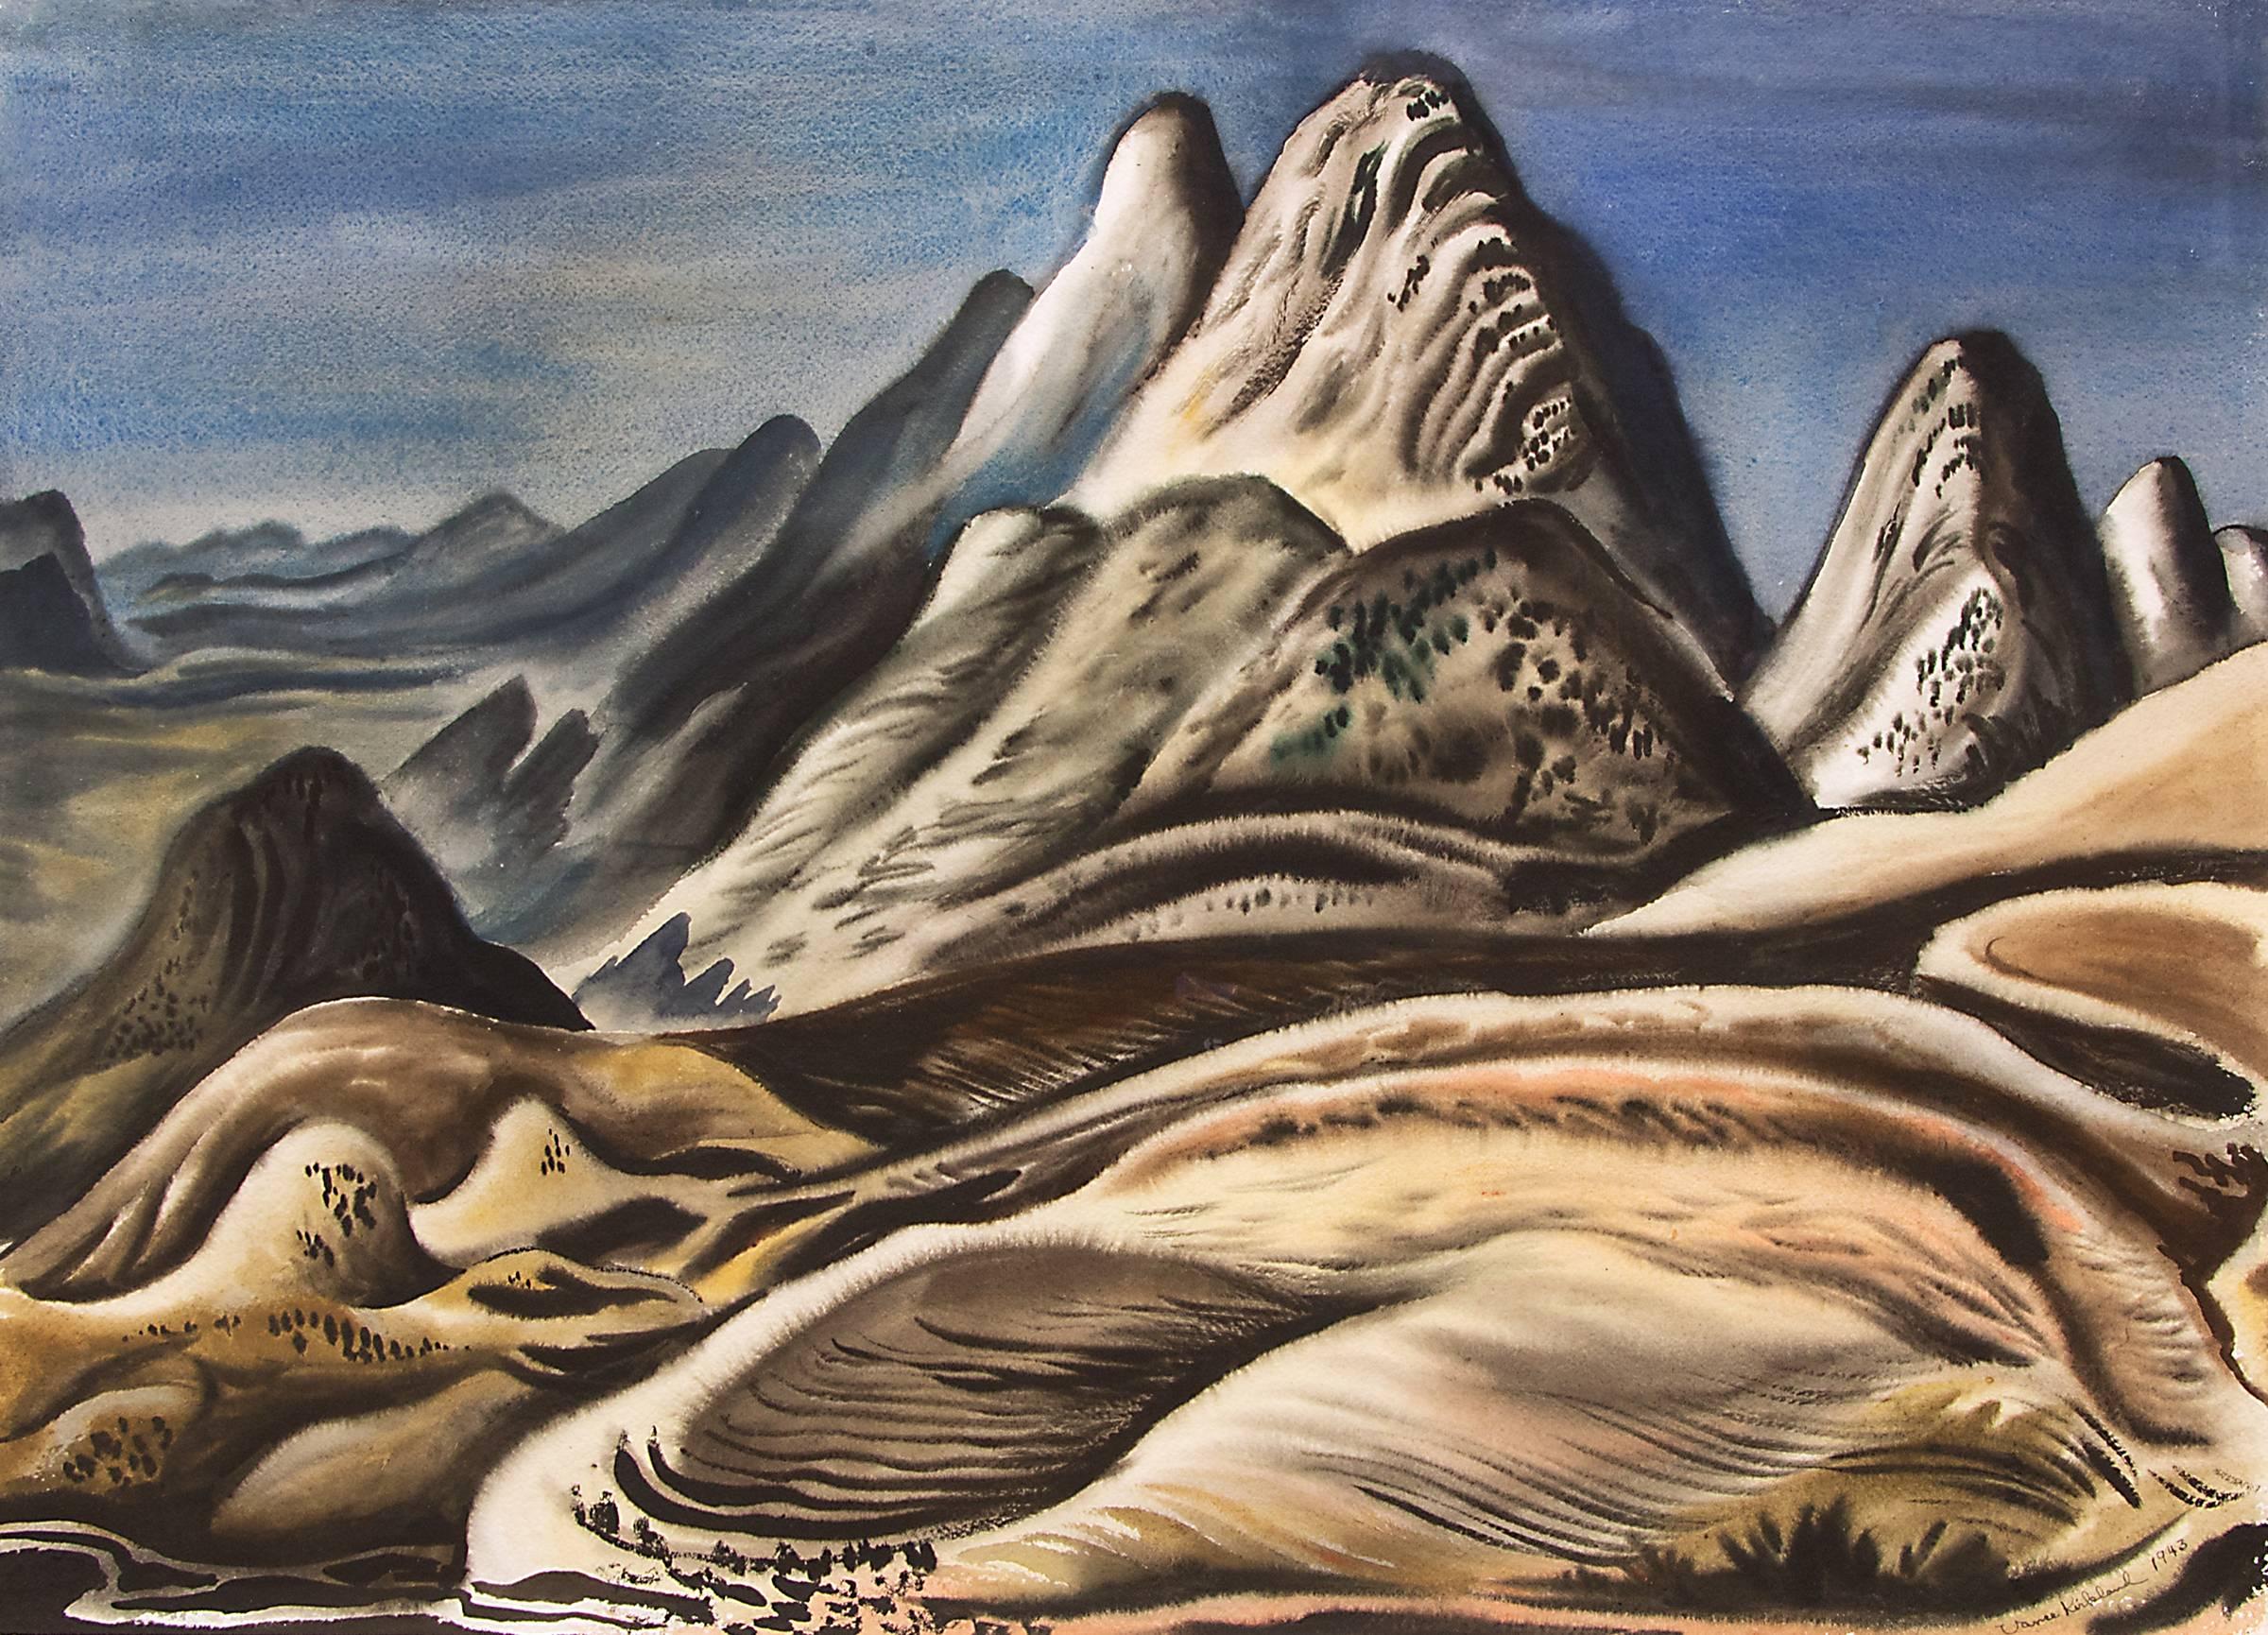 Colorado Landscape (View from Red Rocks looking south toward Soda Lakes) - Painting by Vance Kirkland